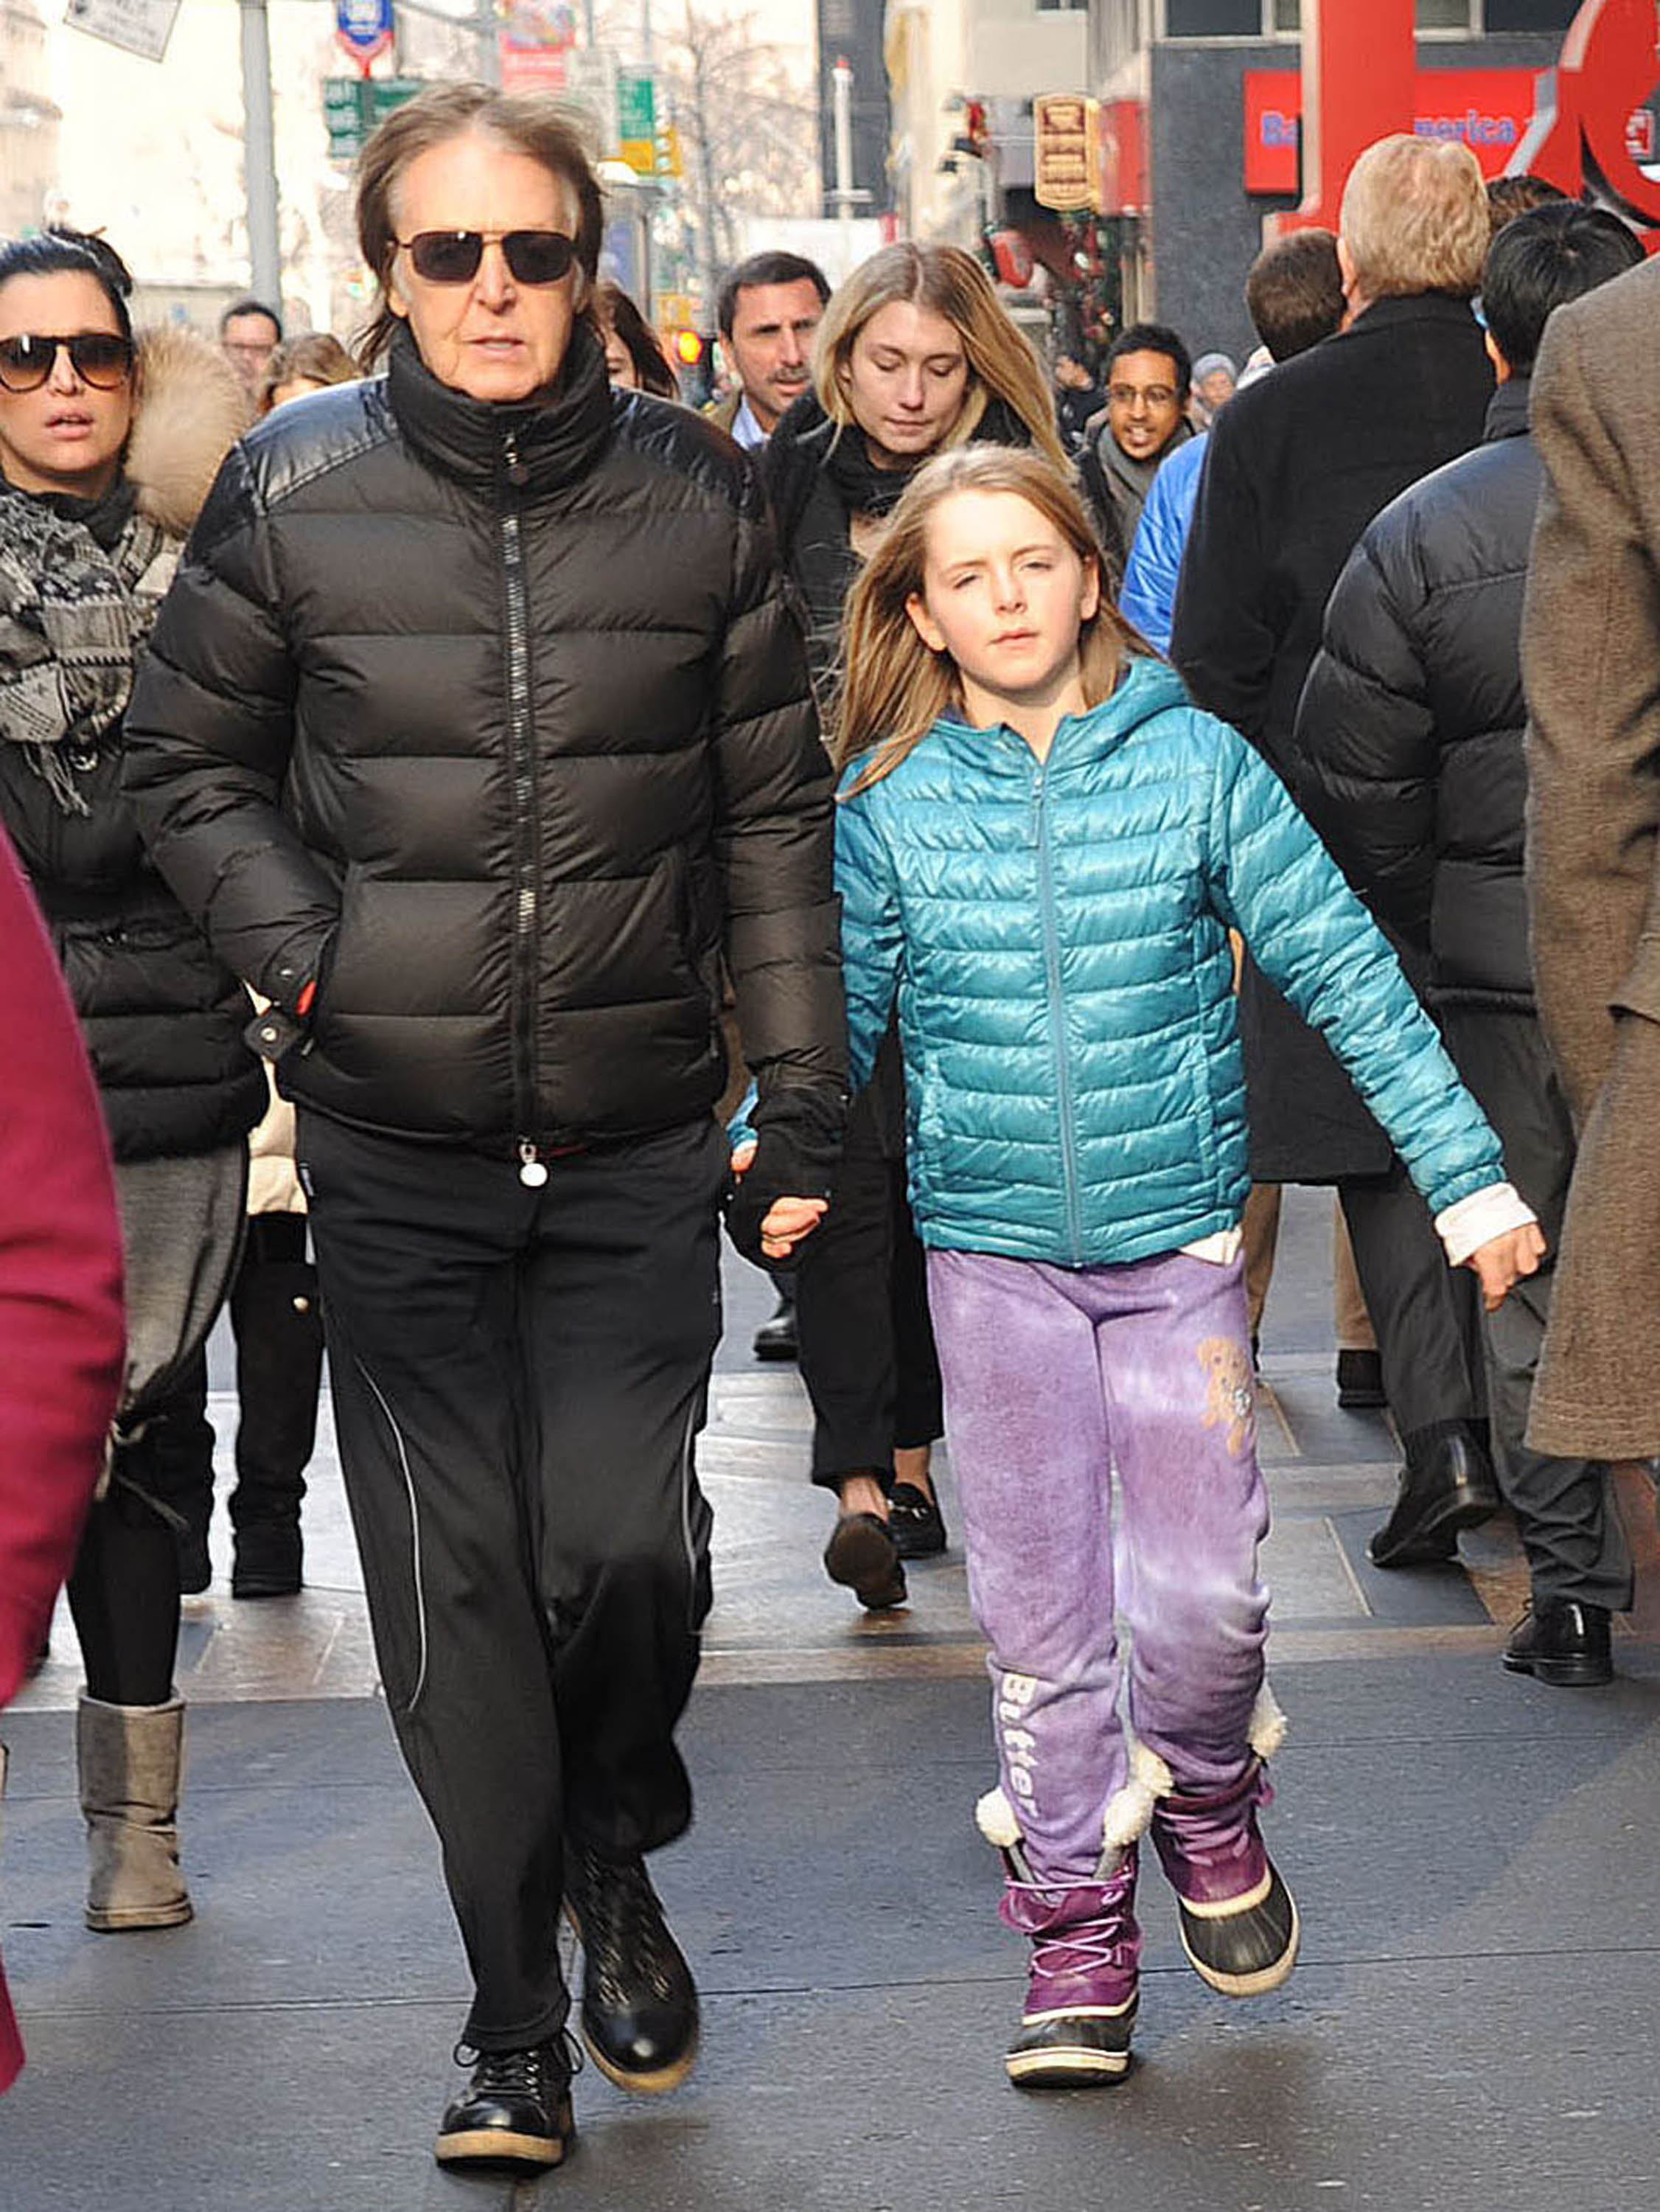 Paul McCartney and his daughter, Beatrice McCartney seen on December 19, 2013 in New York City | Source: Getty Images